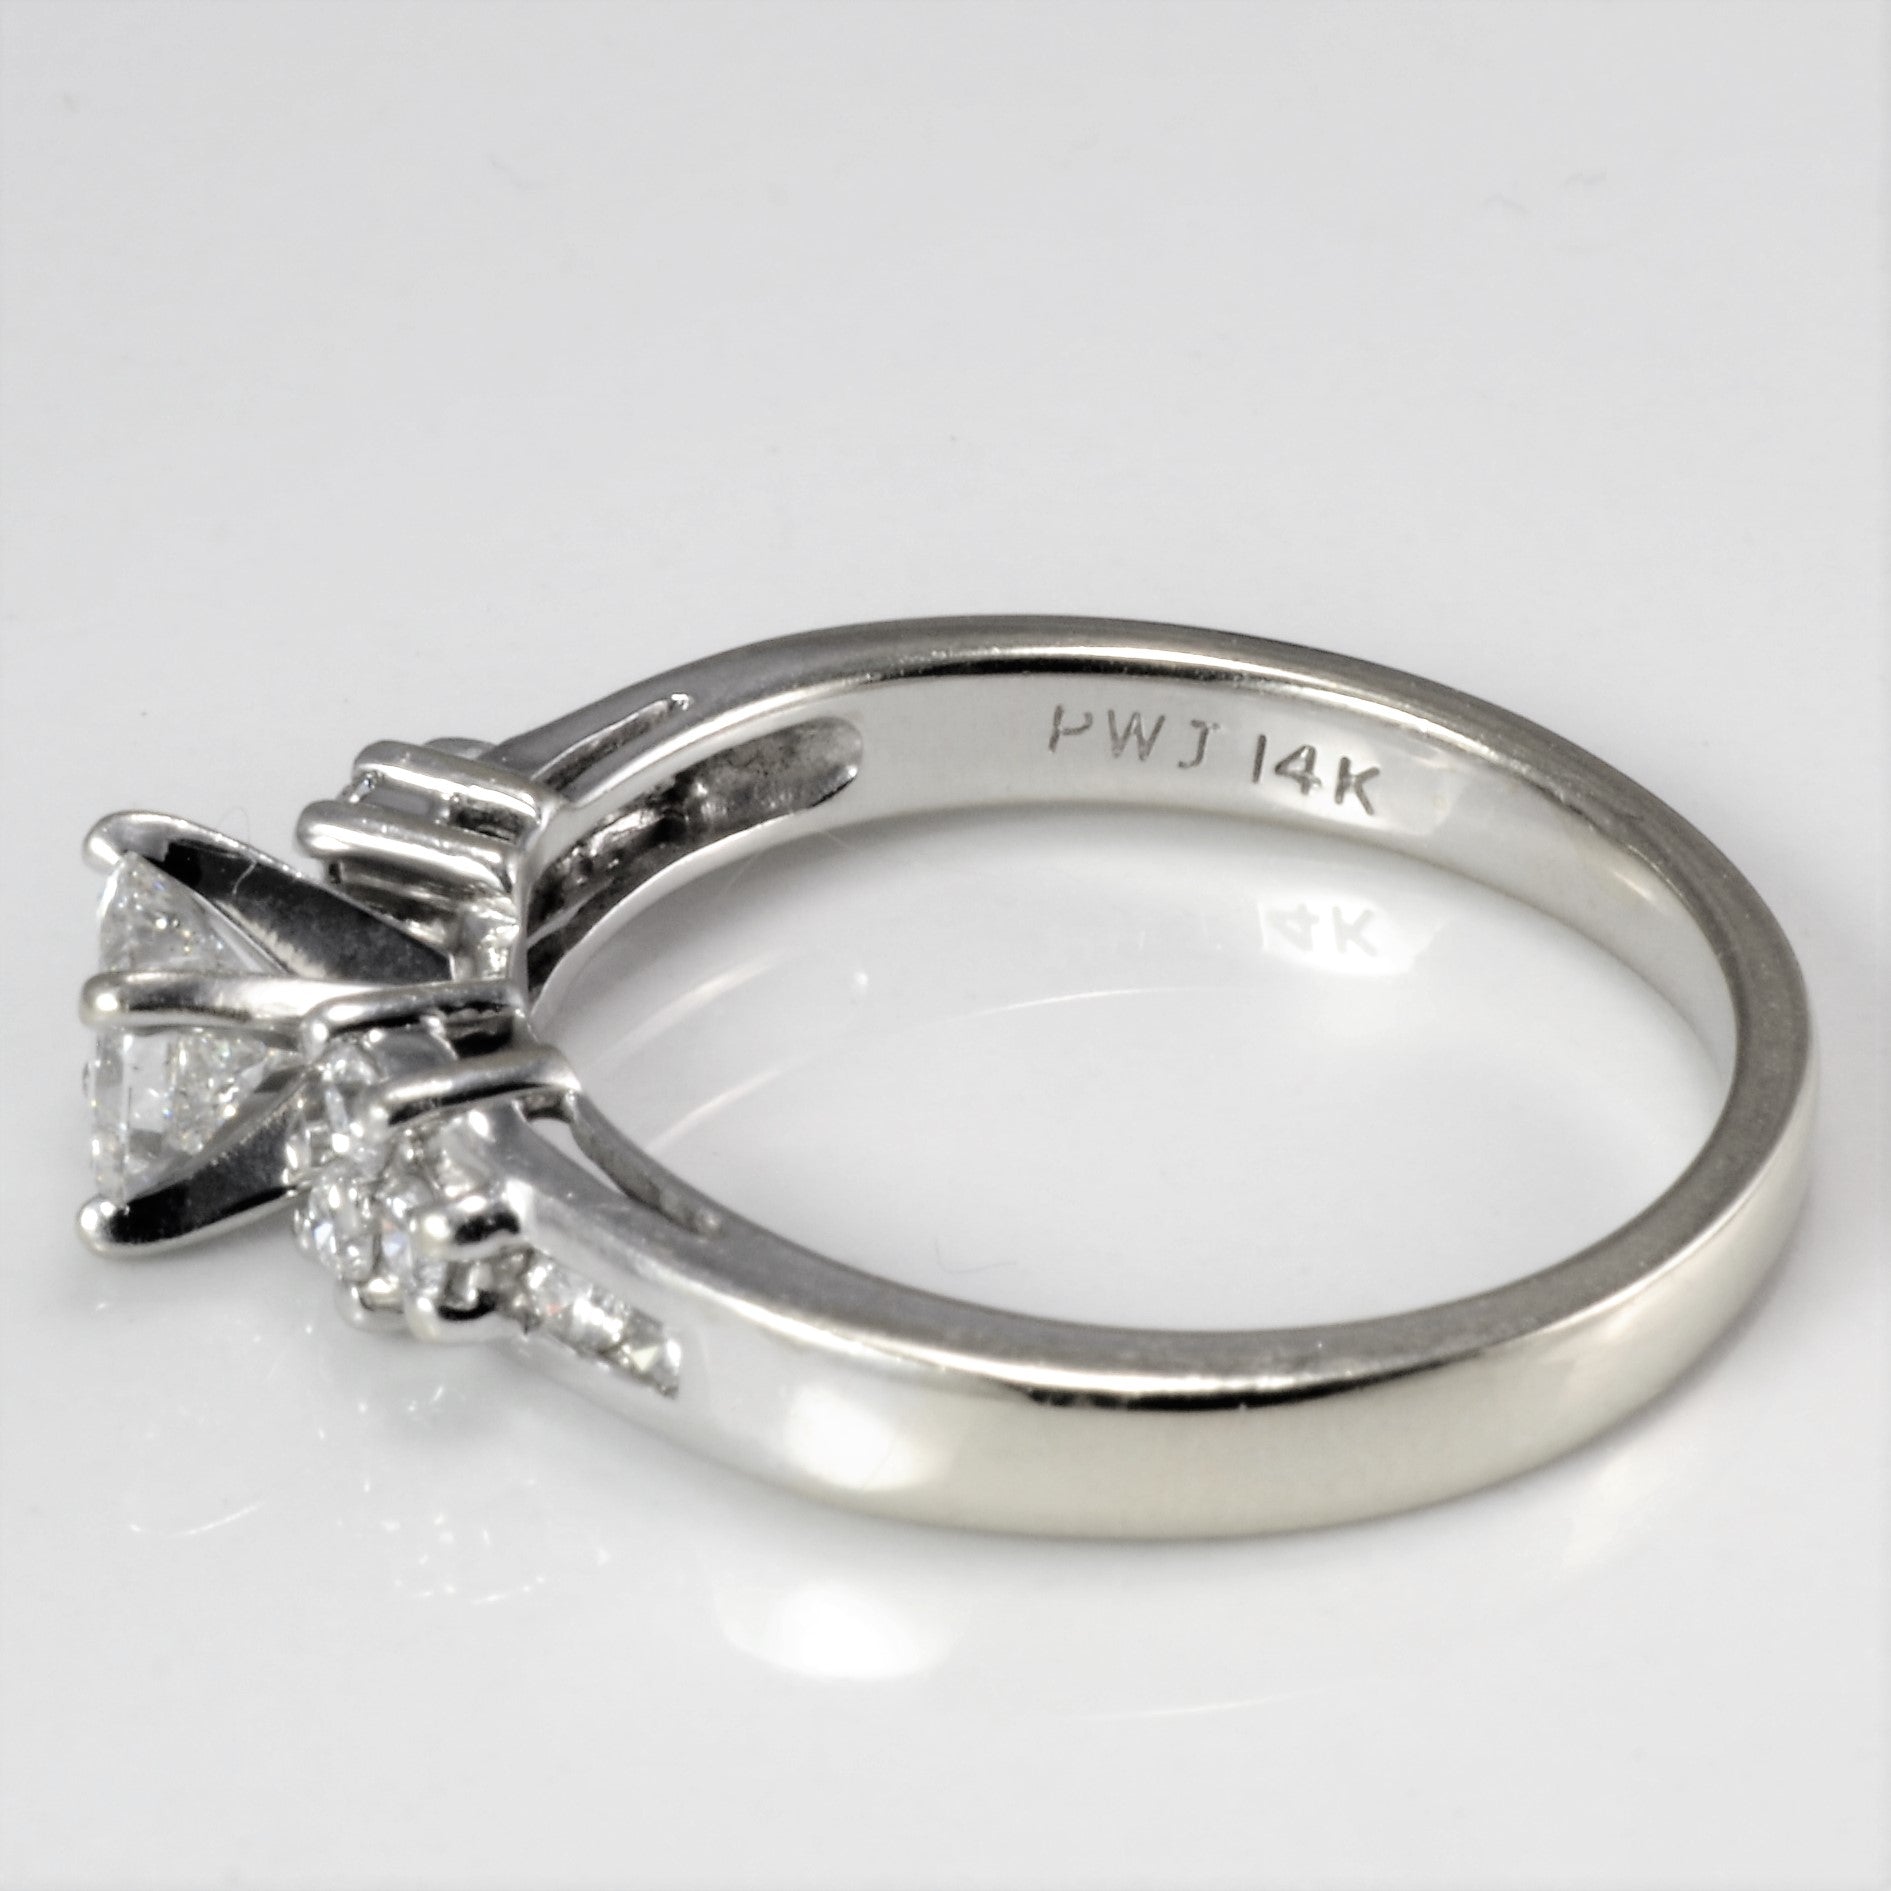 Cluster Accented Princess Diamond Ring | 0.60 ctw, SZ 7 | SI1, G |